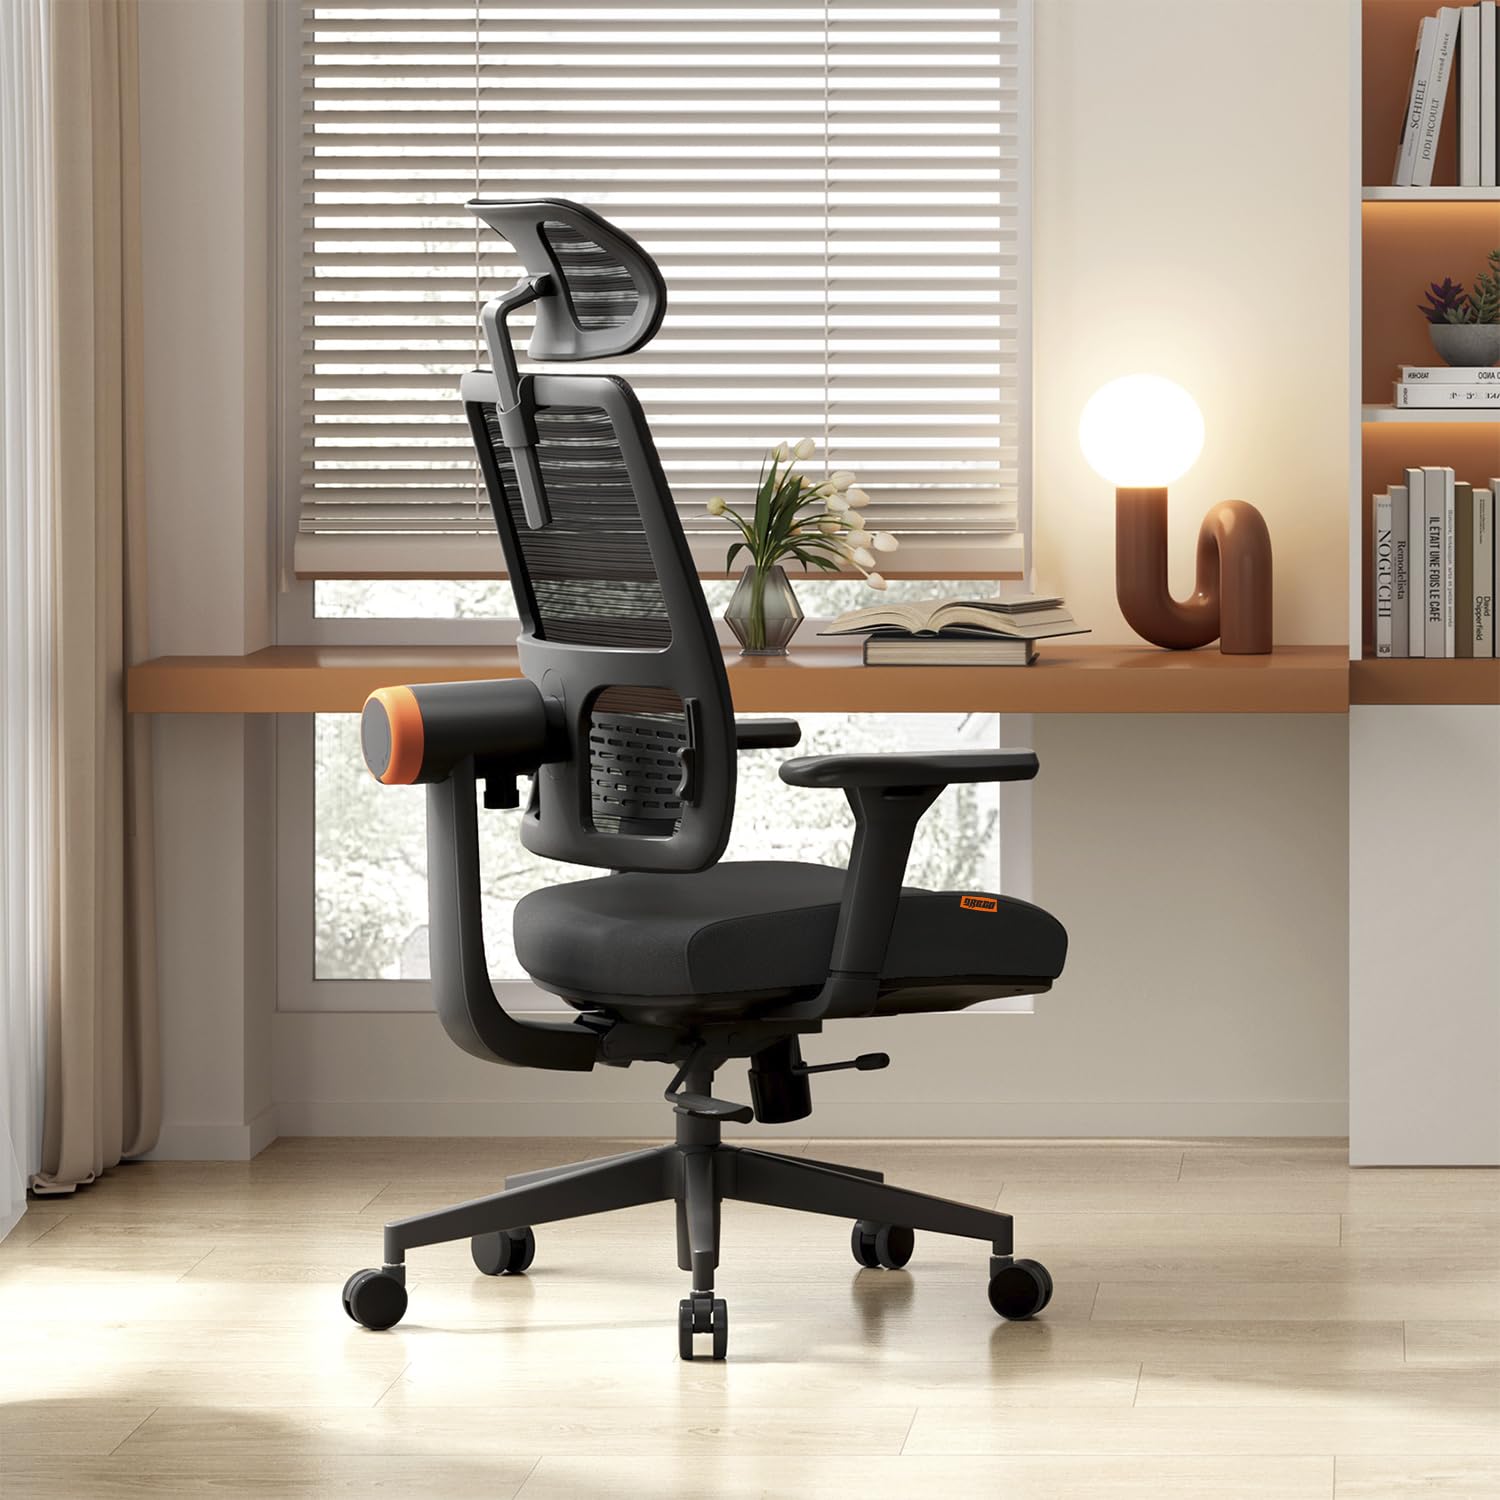 Drogo PosturePro Office Chair for Work from Home, High Back Computer Chair with Adaptive Lumbar Support & Headrest